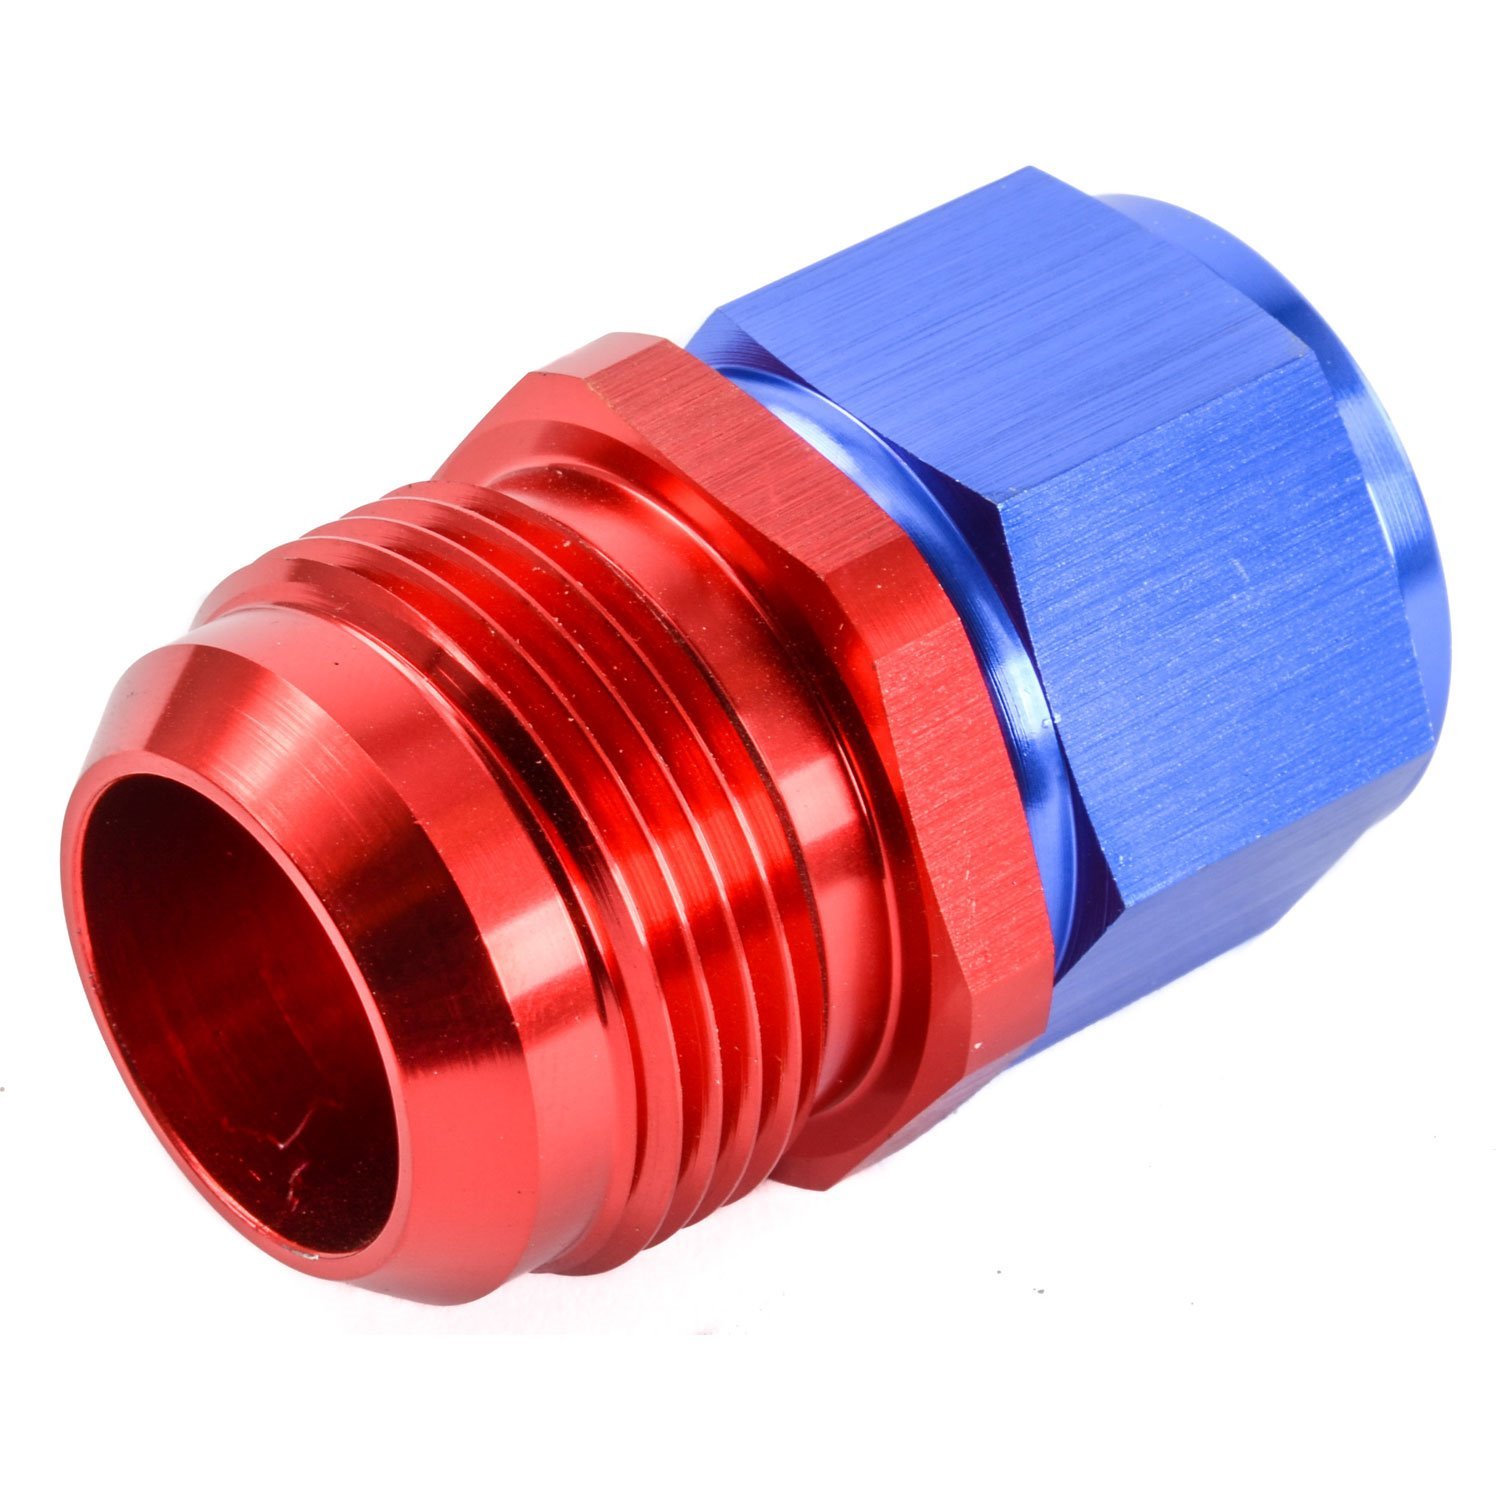 AN Female Swivel to Male Expander Fitting [-12 AN Female to -16 AN Male, Red/Blue]